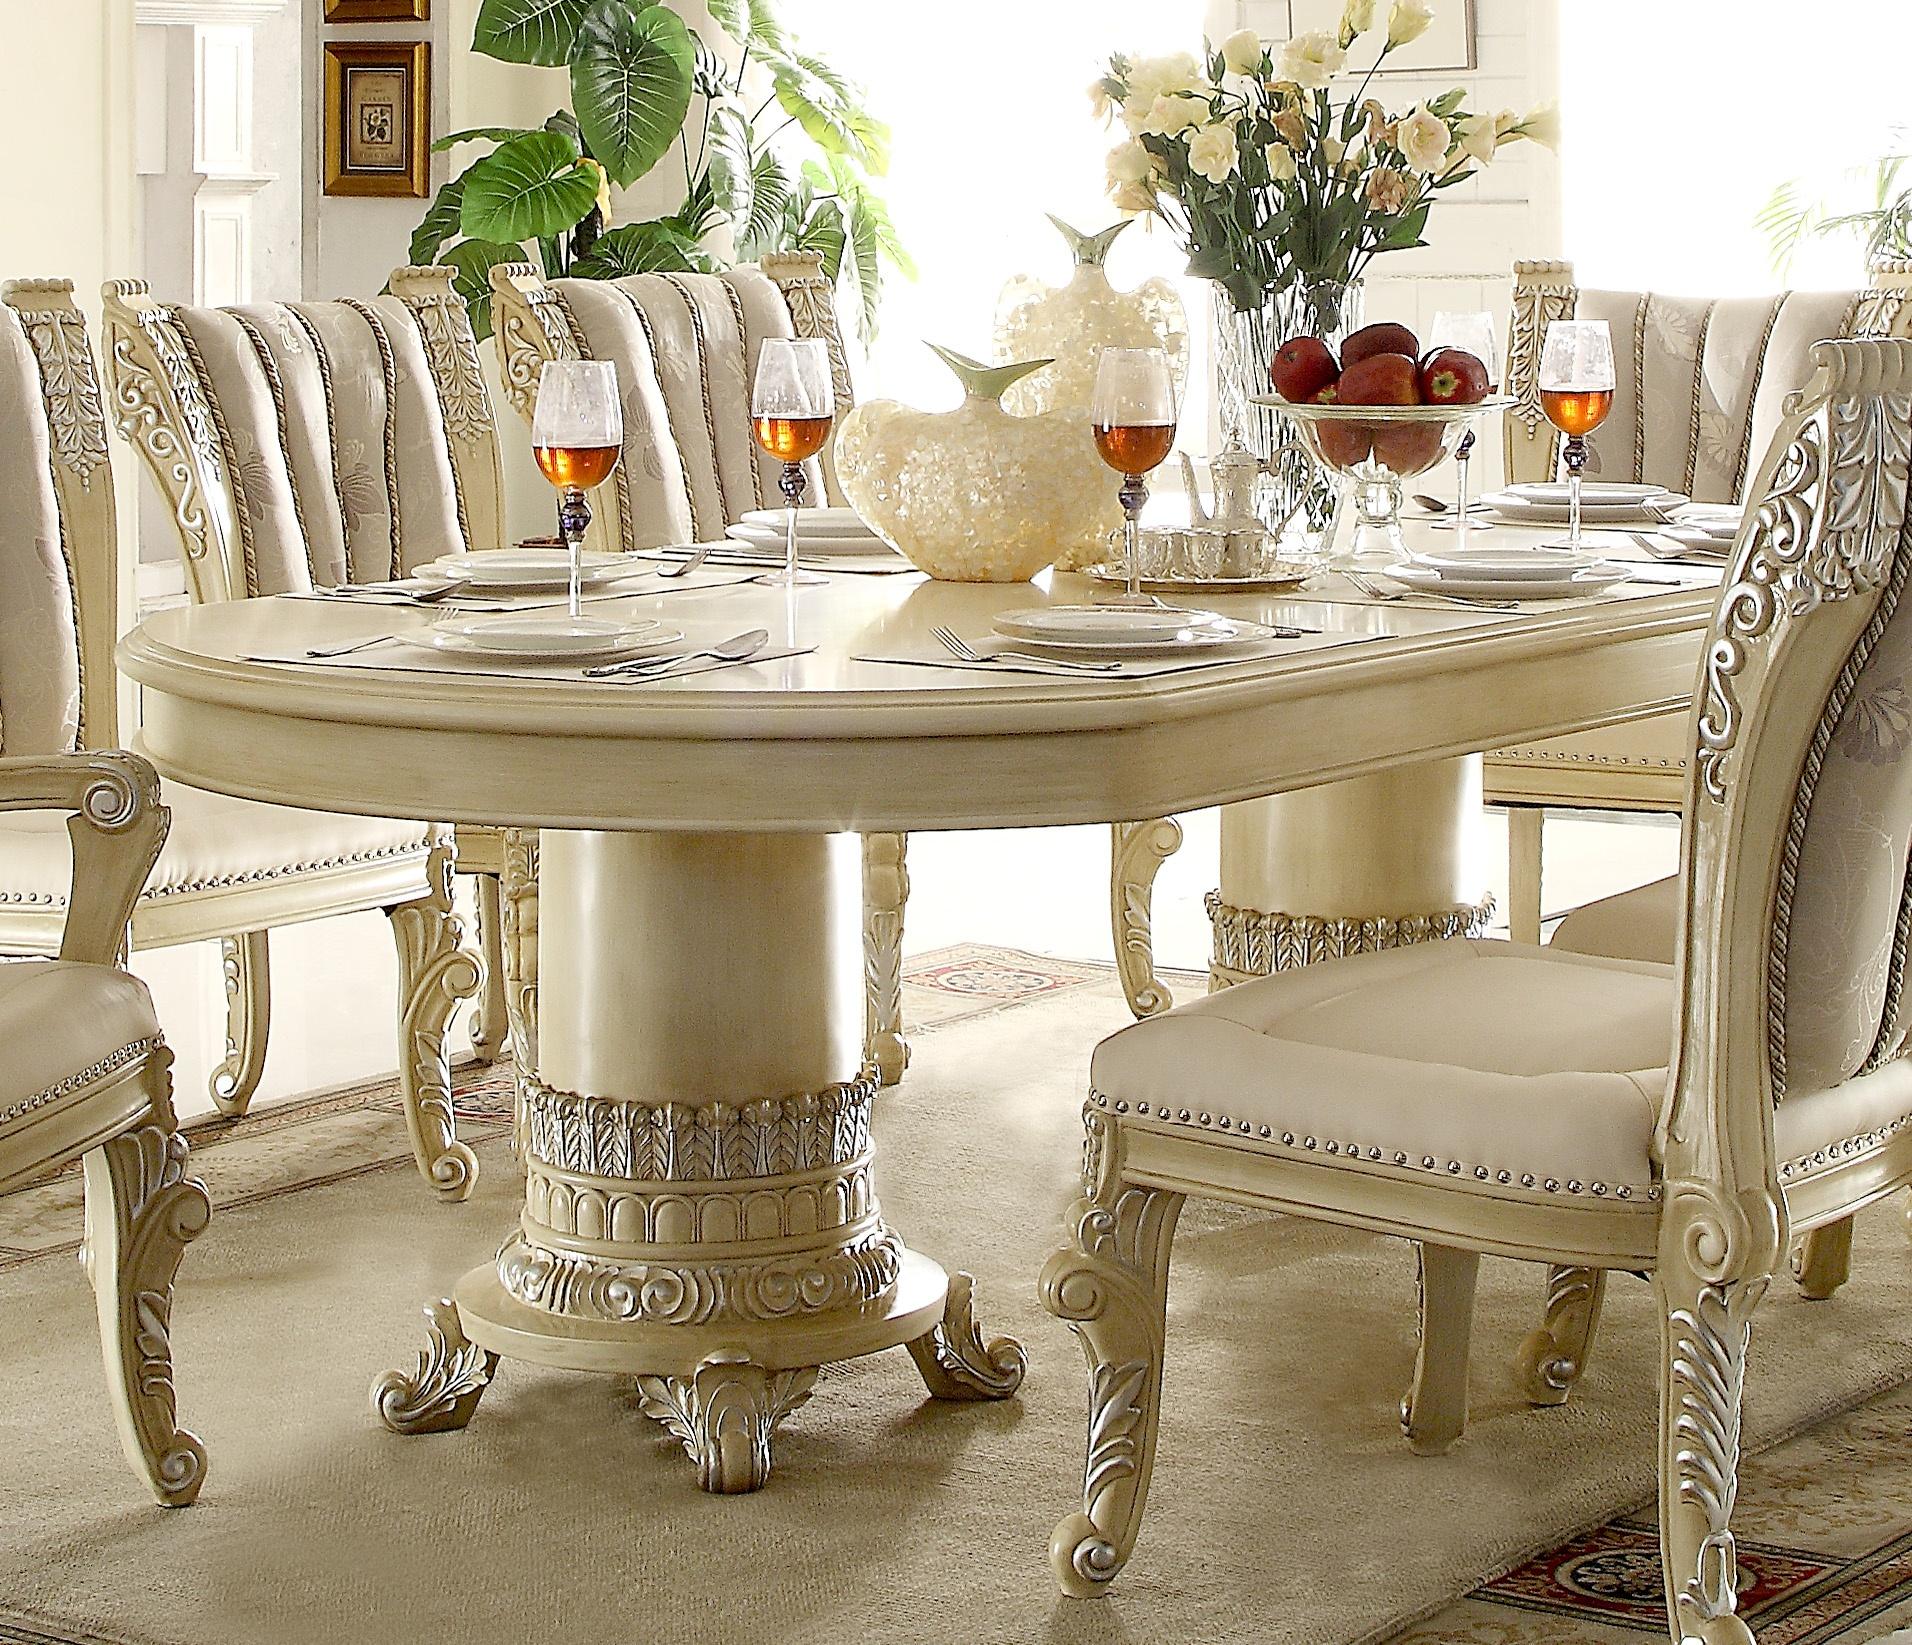 

    
Luxury Cream Pearl Wood Oval Dining Table Traditional Homey Design HD-5800
